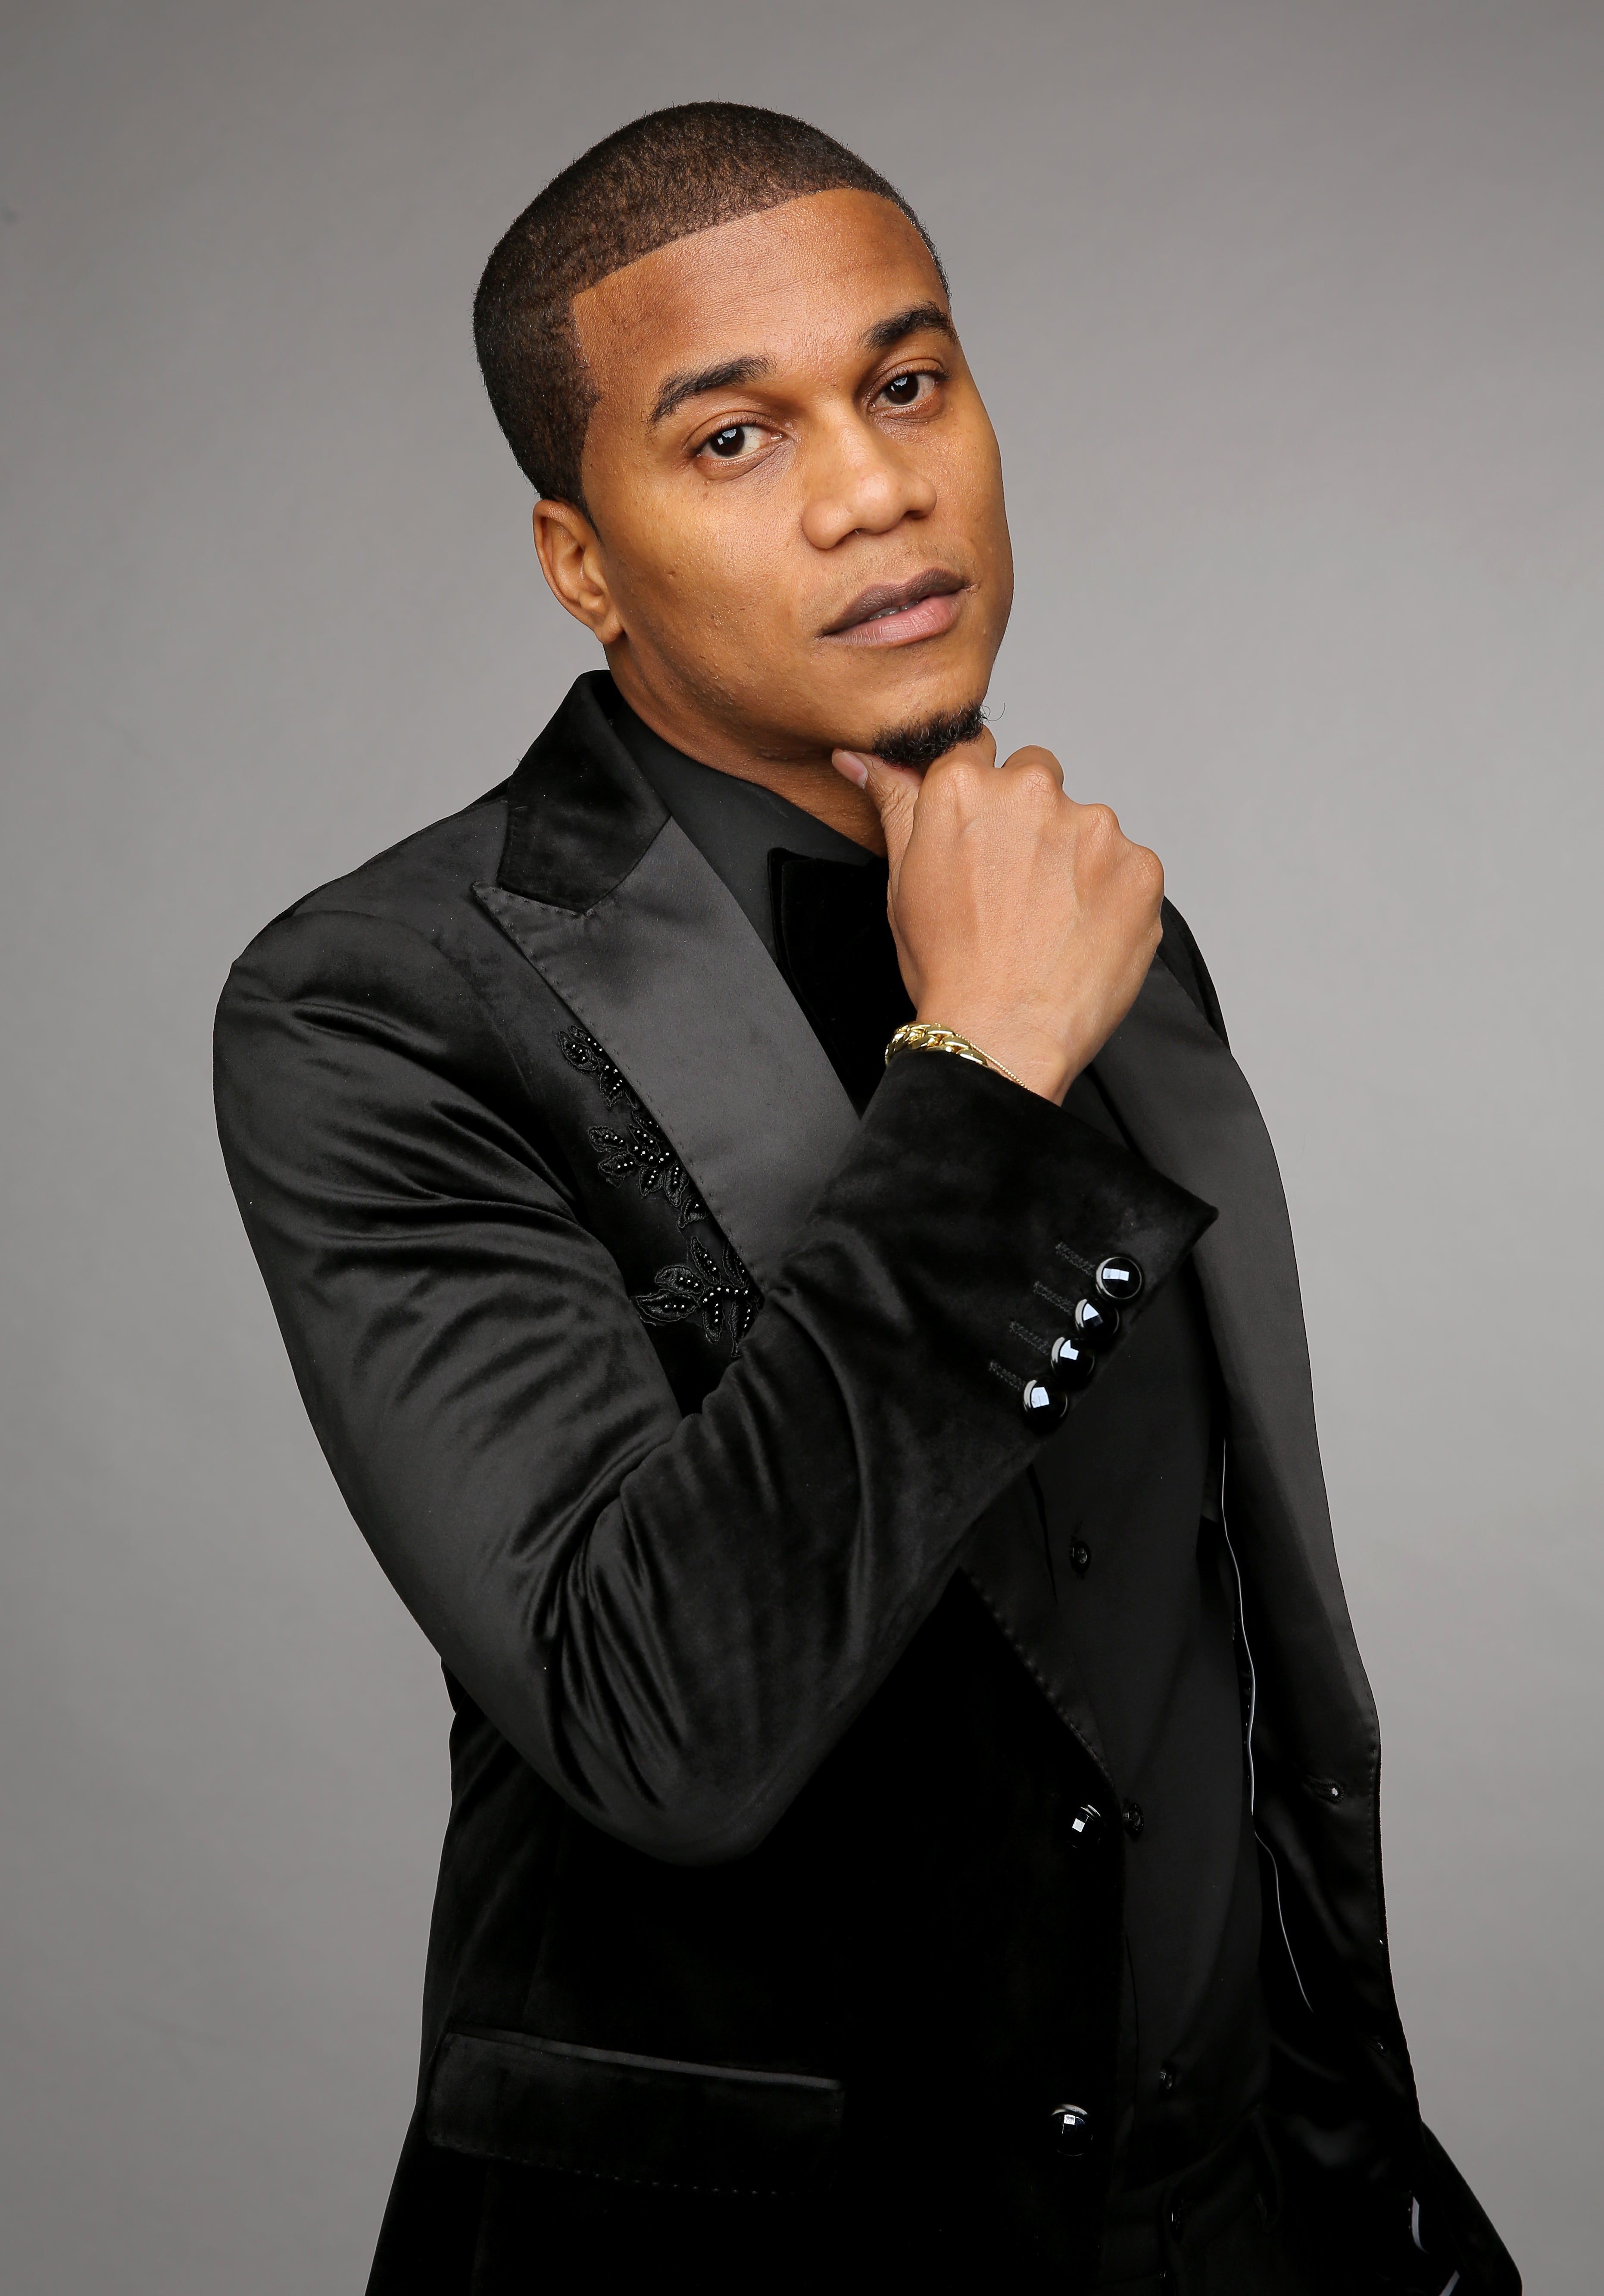 Cory Hardrict Dishes On His Gritty New Role On The 50-Cent Produced Crime Drama 'The Oath'
